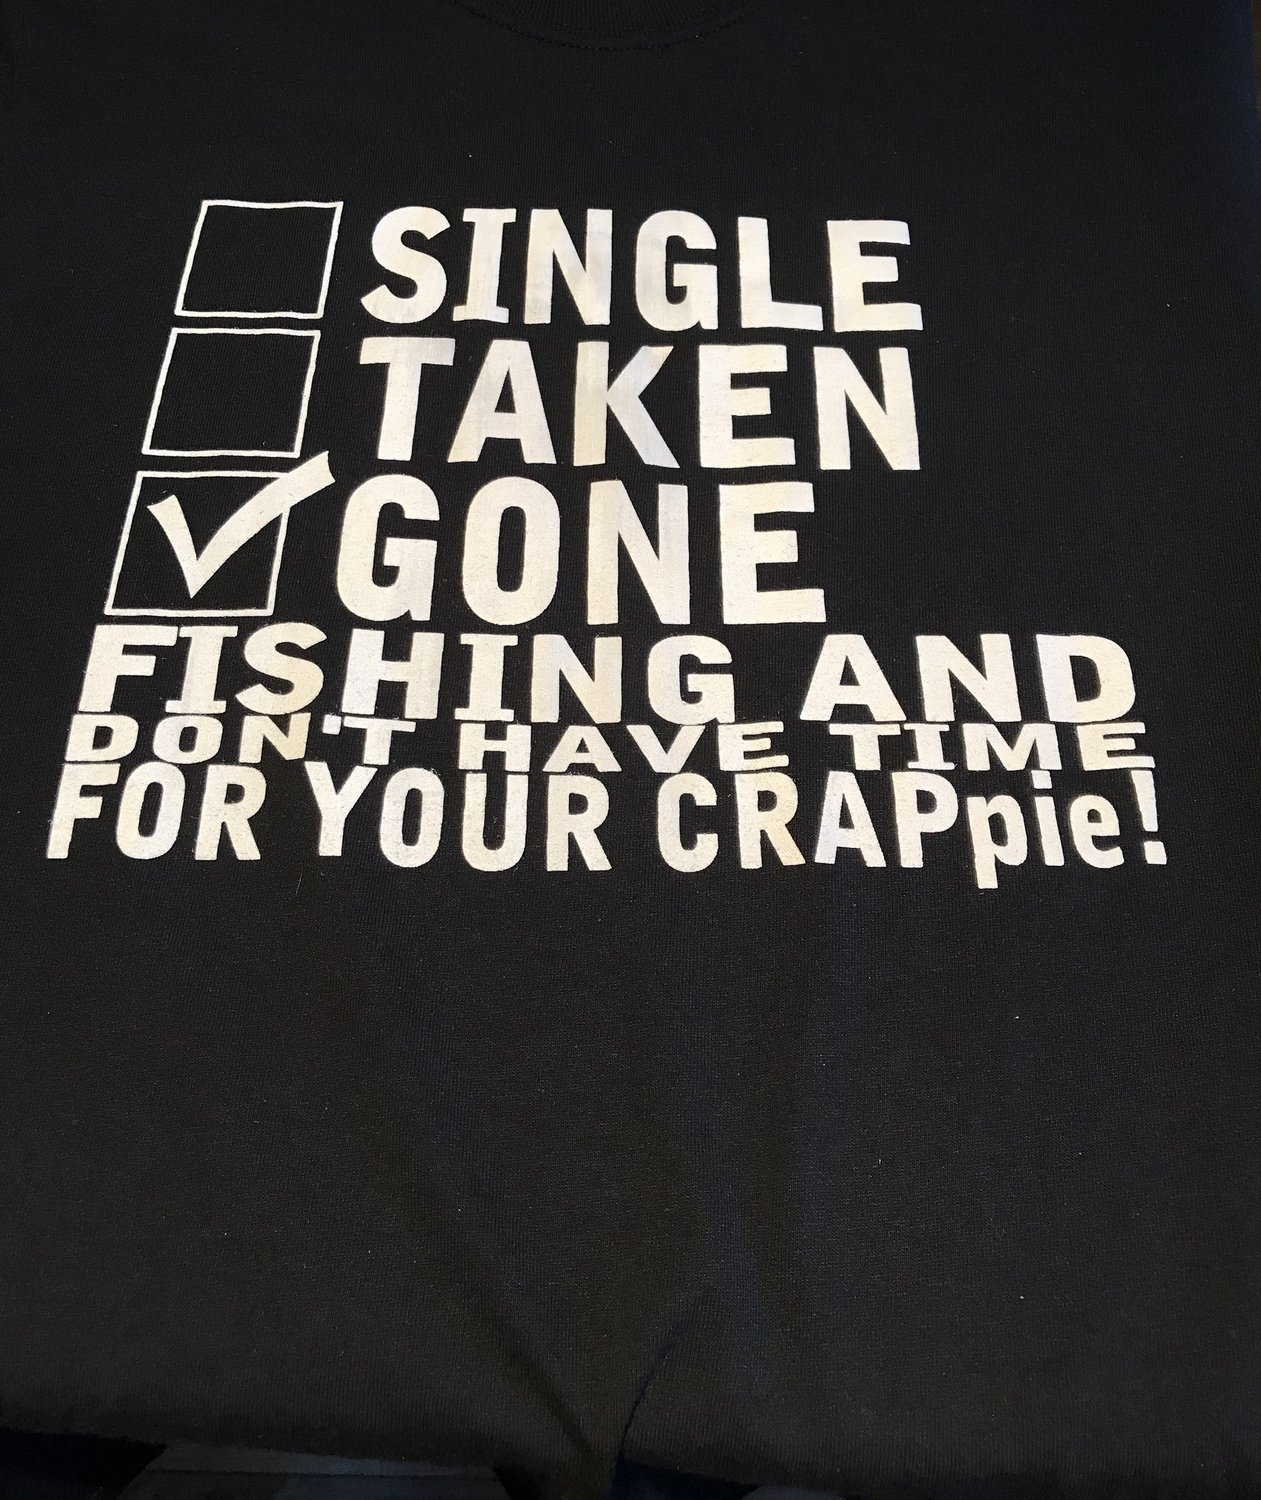 Don't Have Time for your CRAPpie